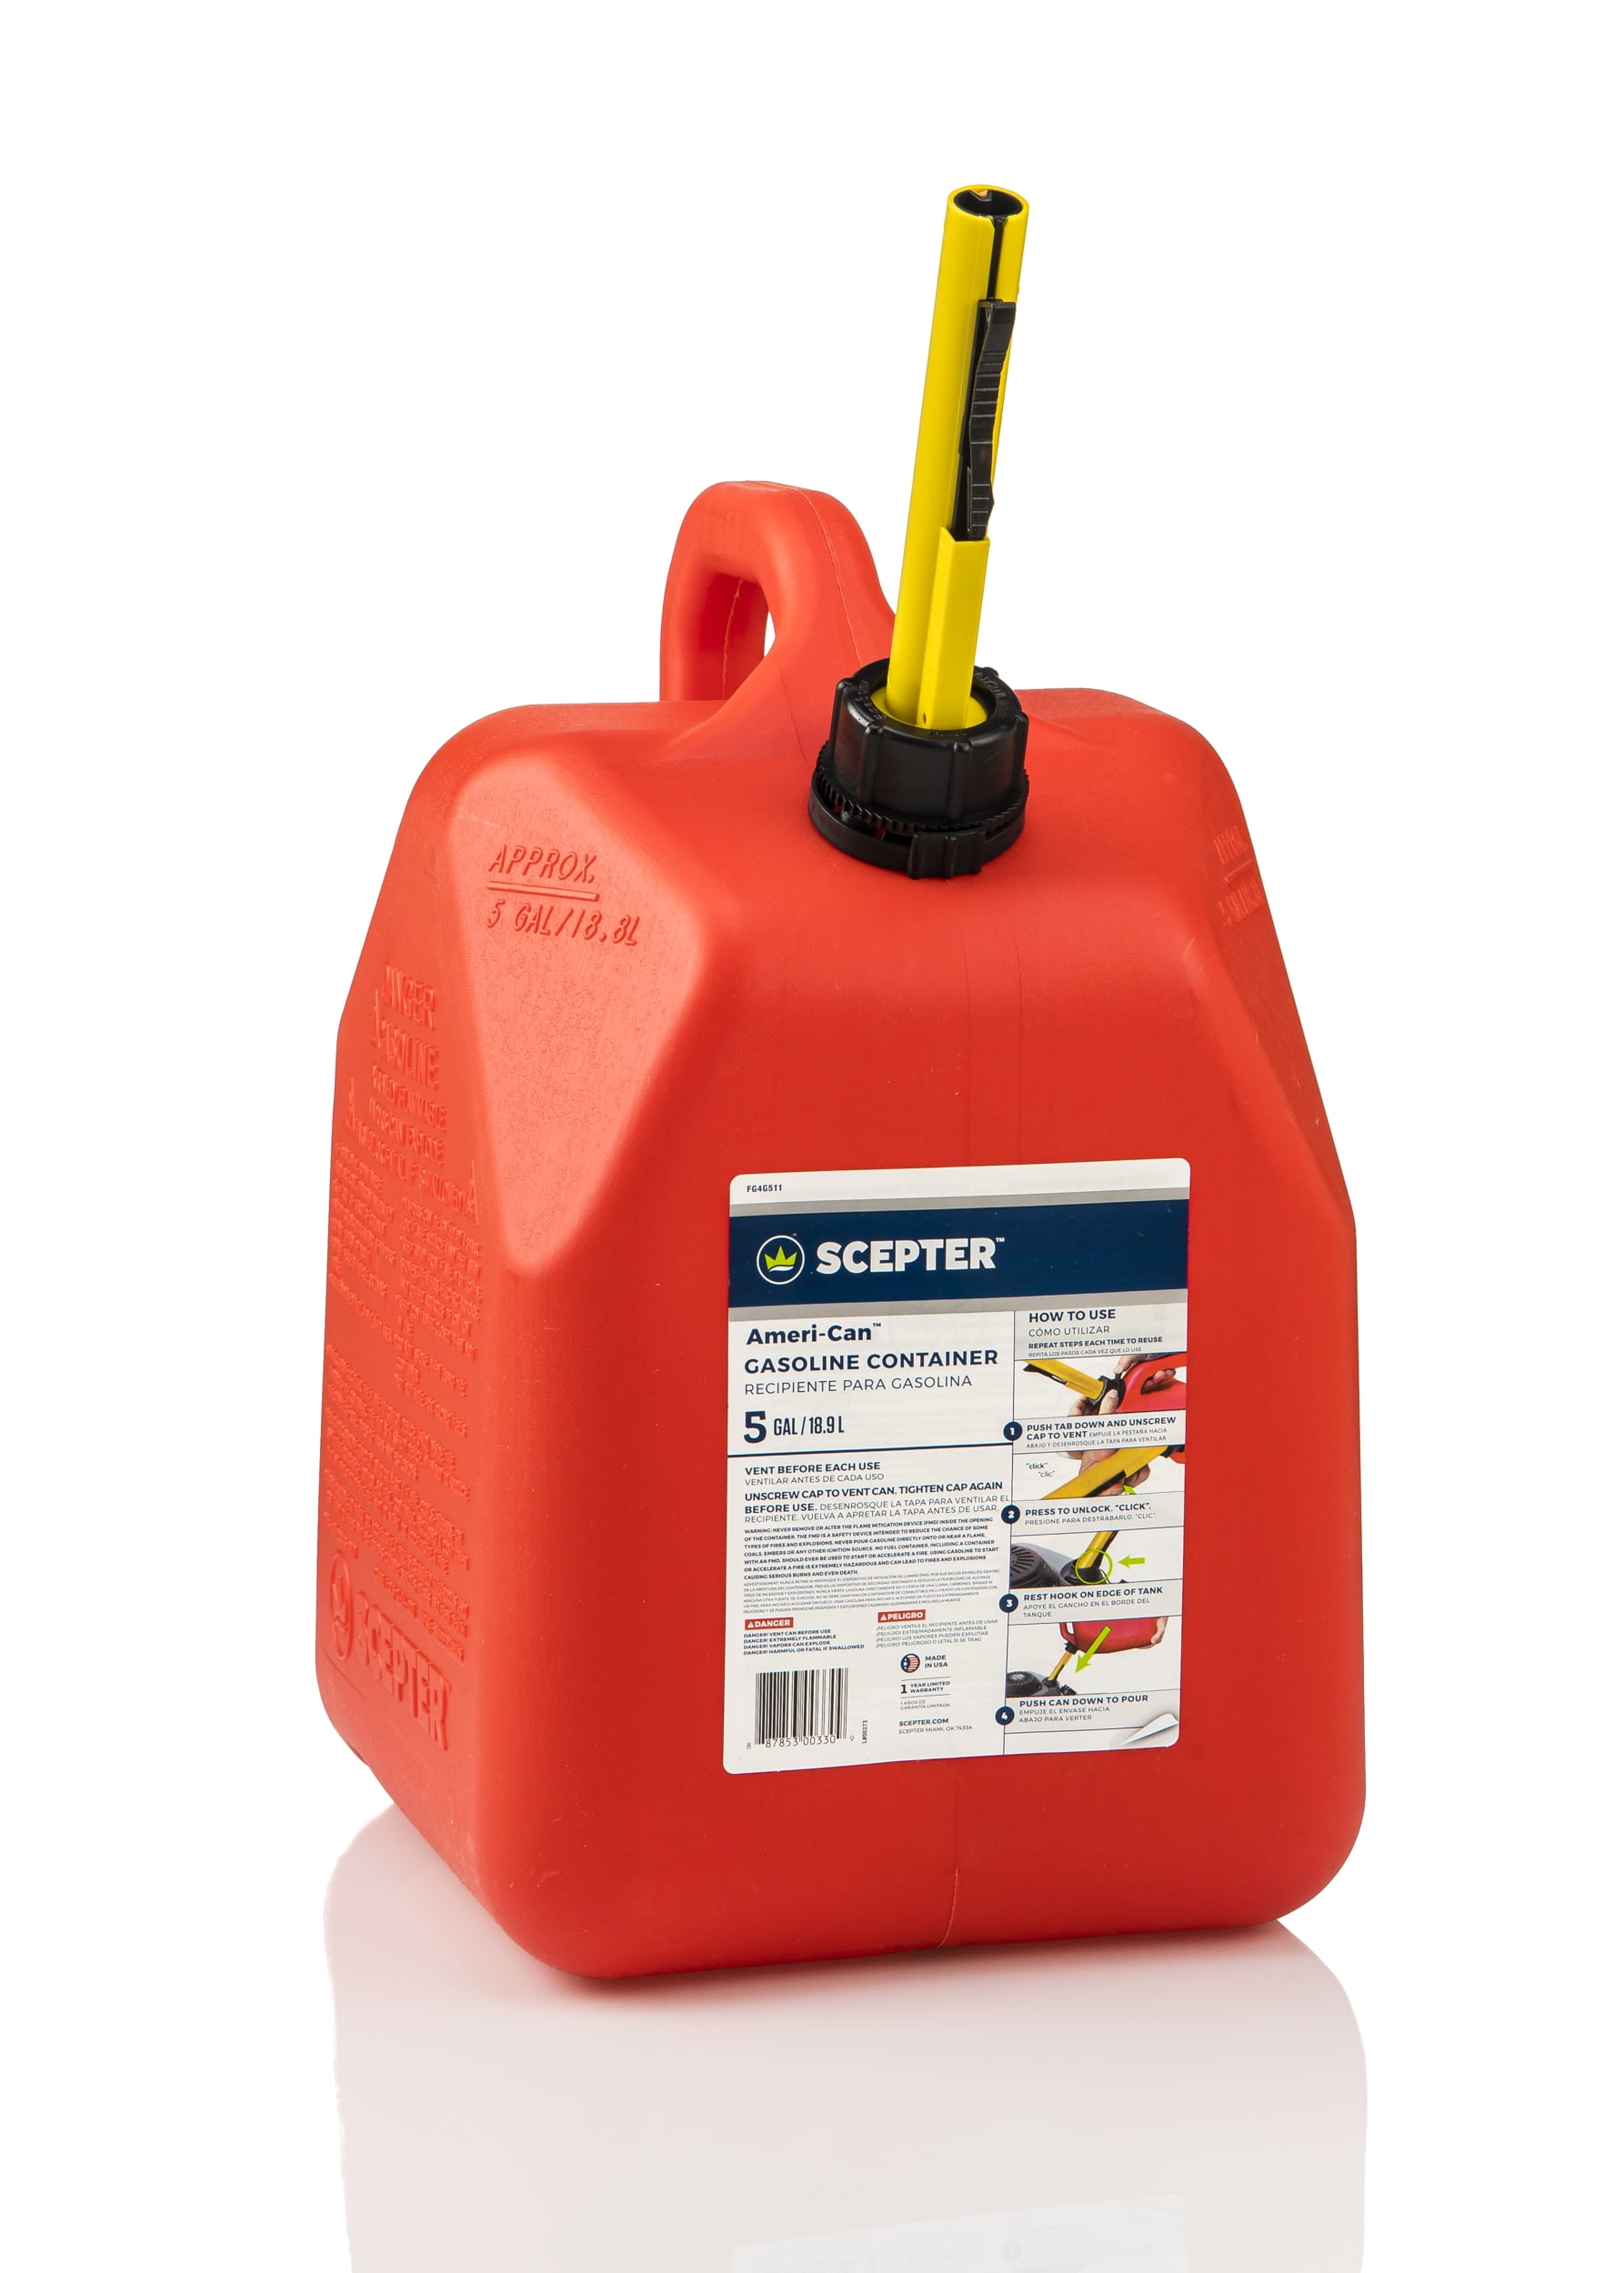 EAGLE MFG NEW OPENED BOX 3.78 LITERS UI-10 S SAFETY GAS CAN 1 GALLON 